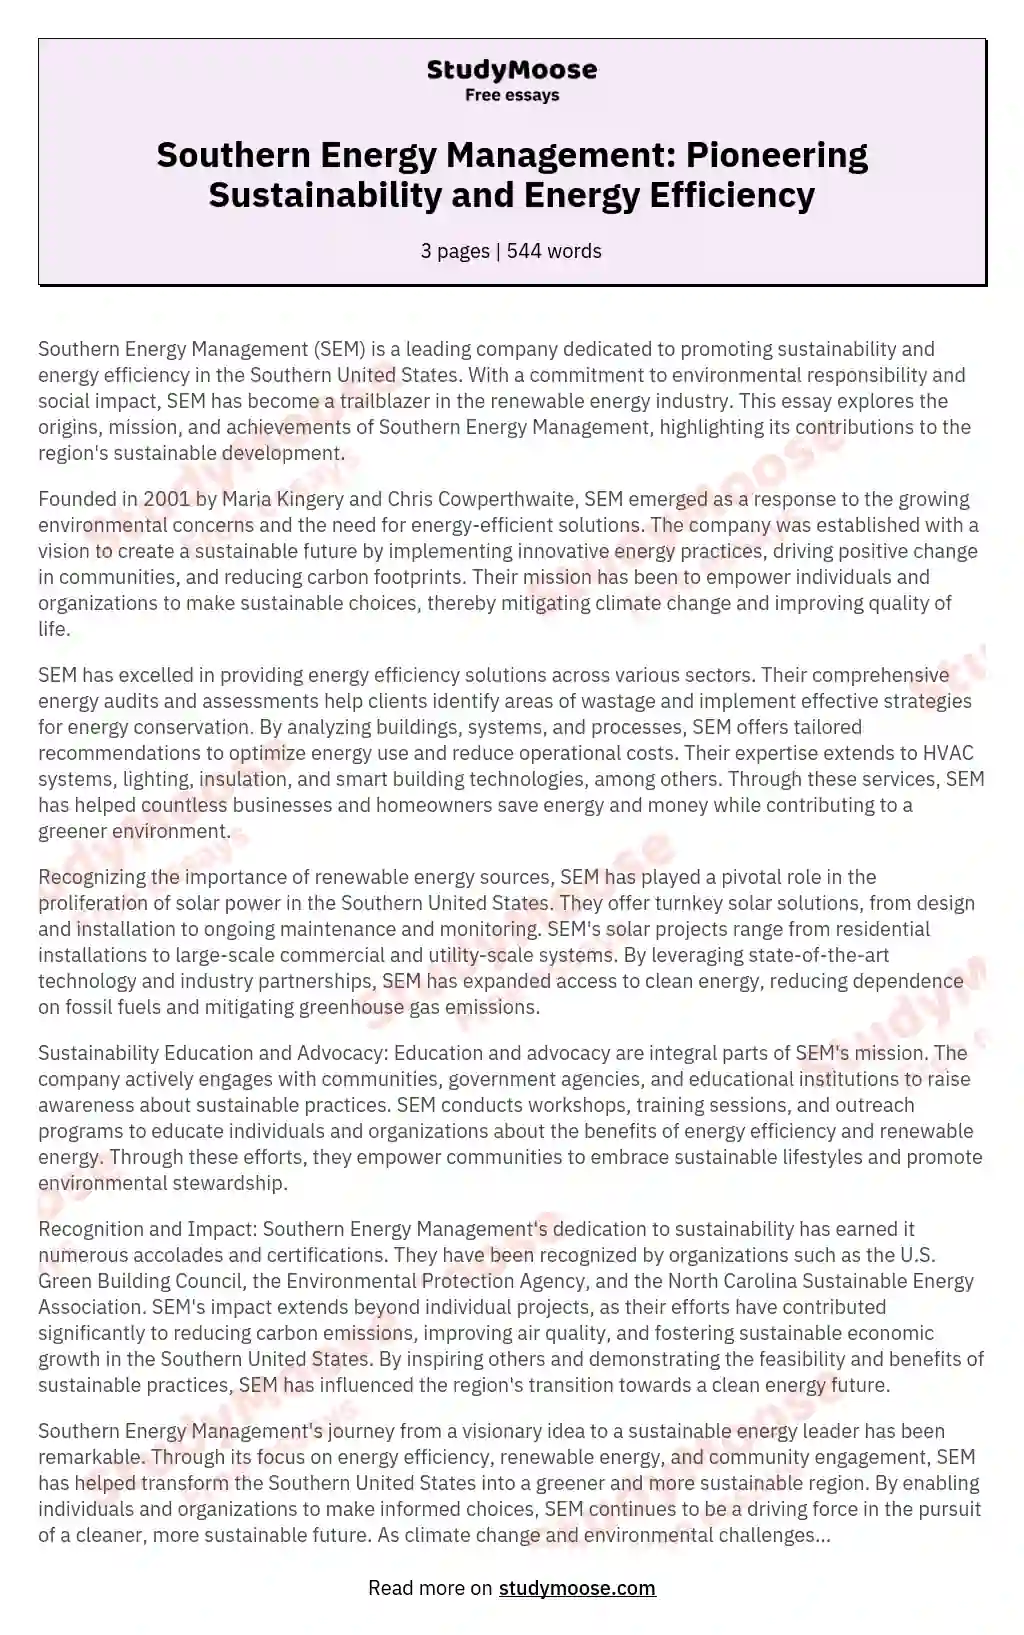 Southern Energy Management: Pioneering Sustainability and Energy Efficiency essay